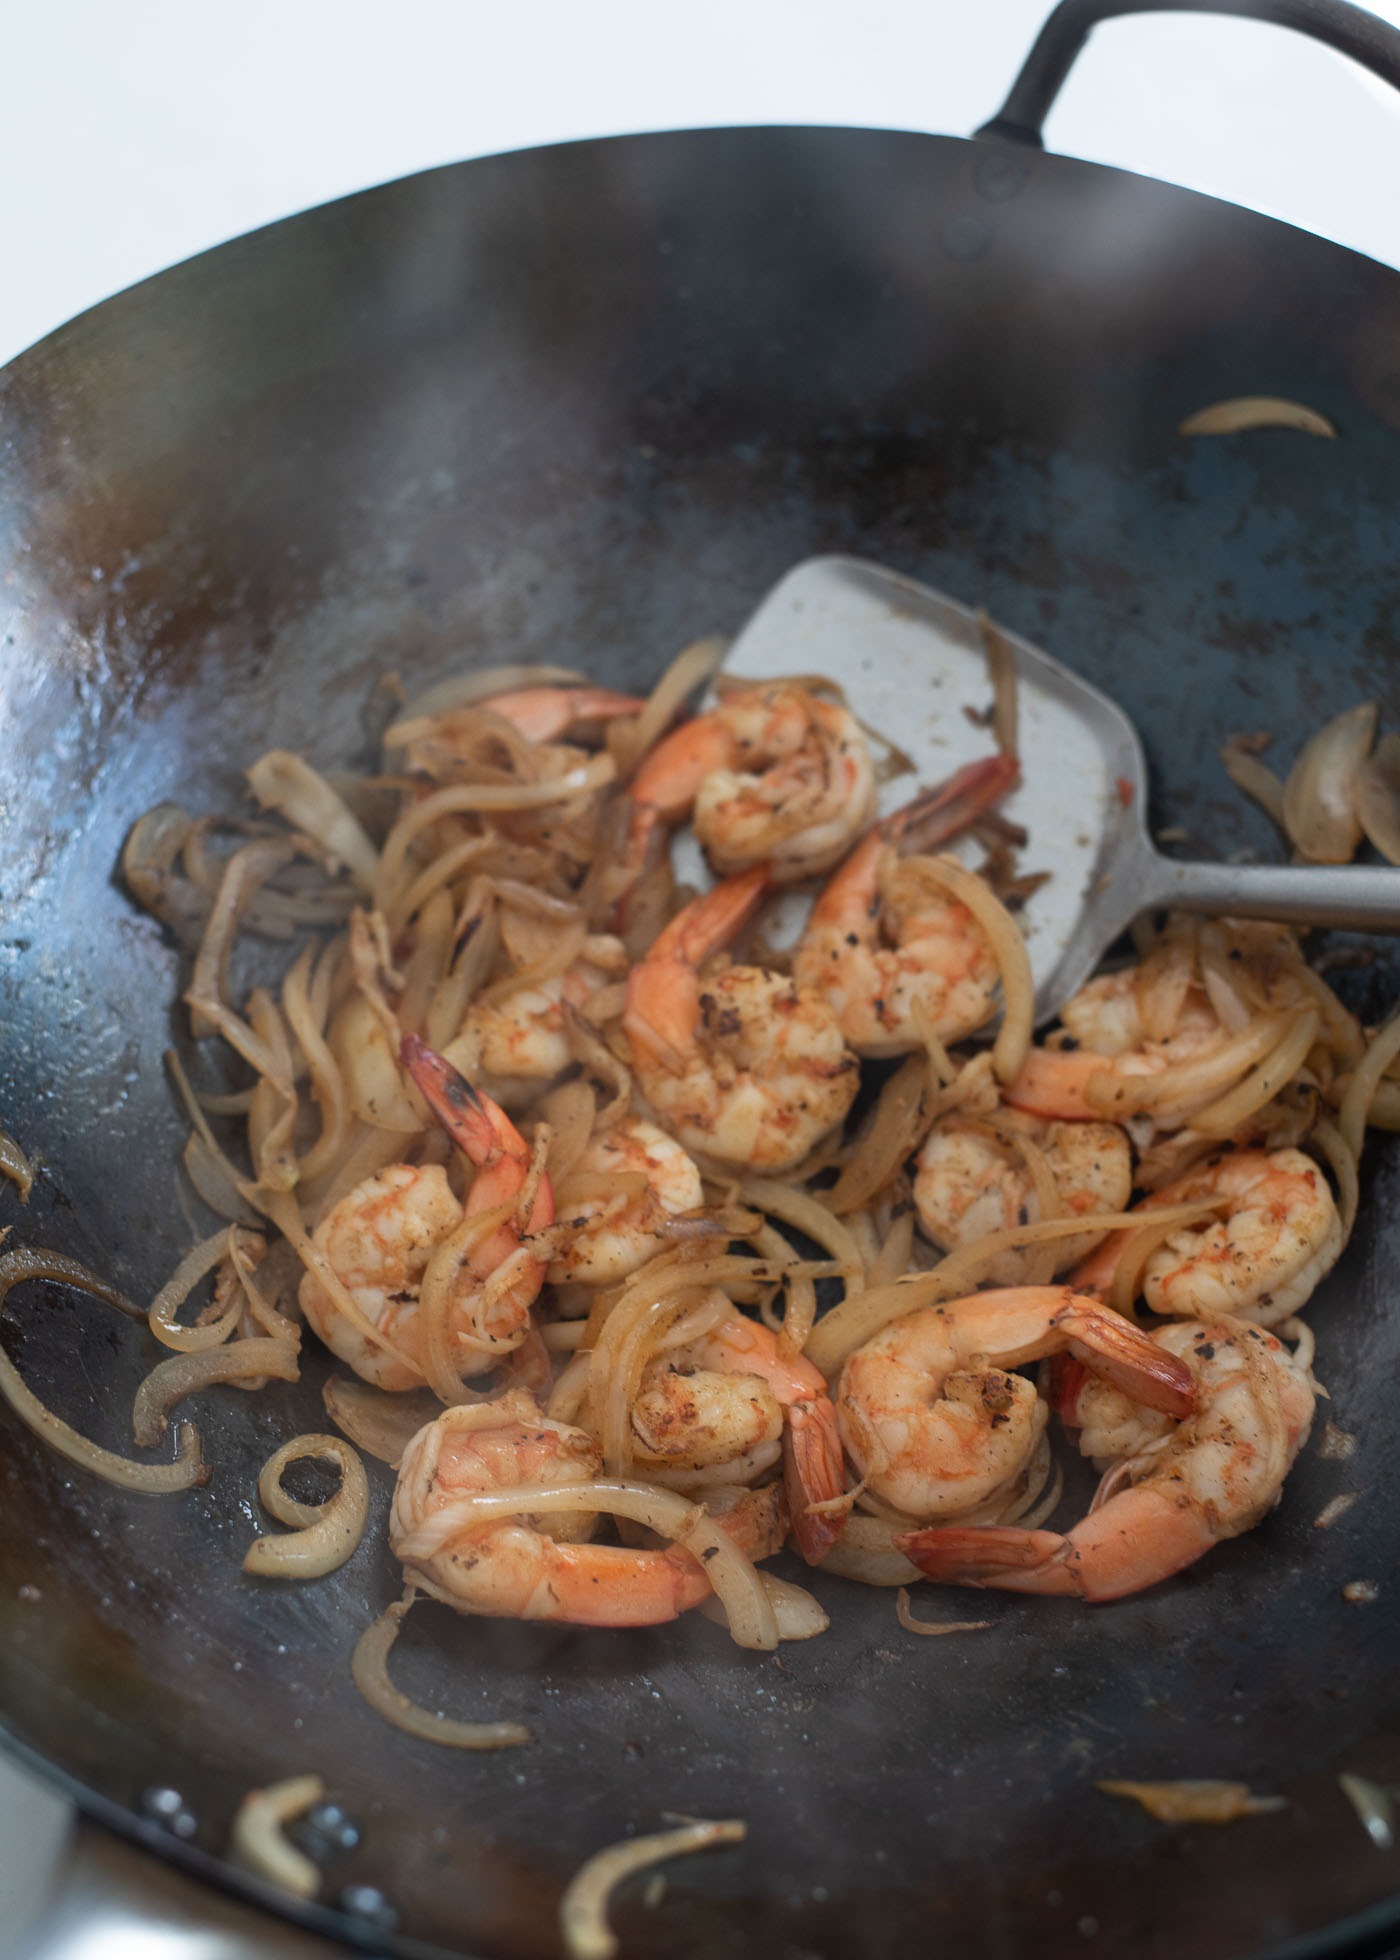 Onion and shrimp are cooked in a wok.